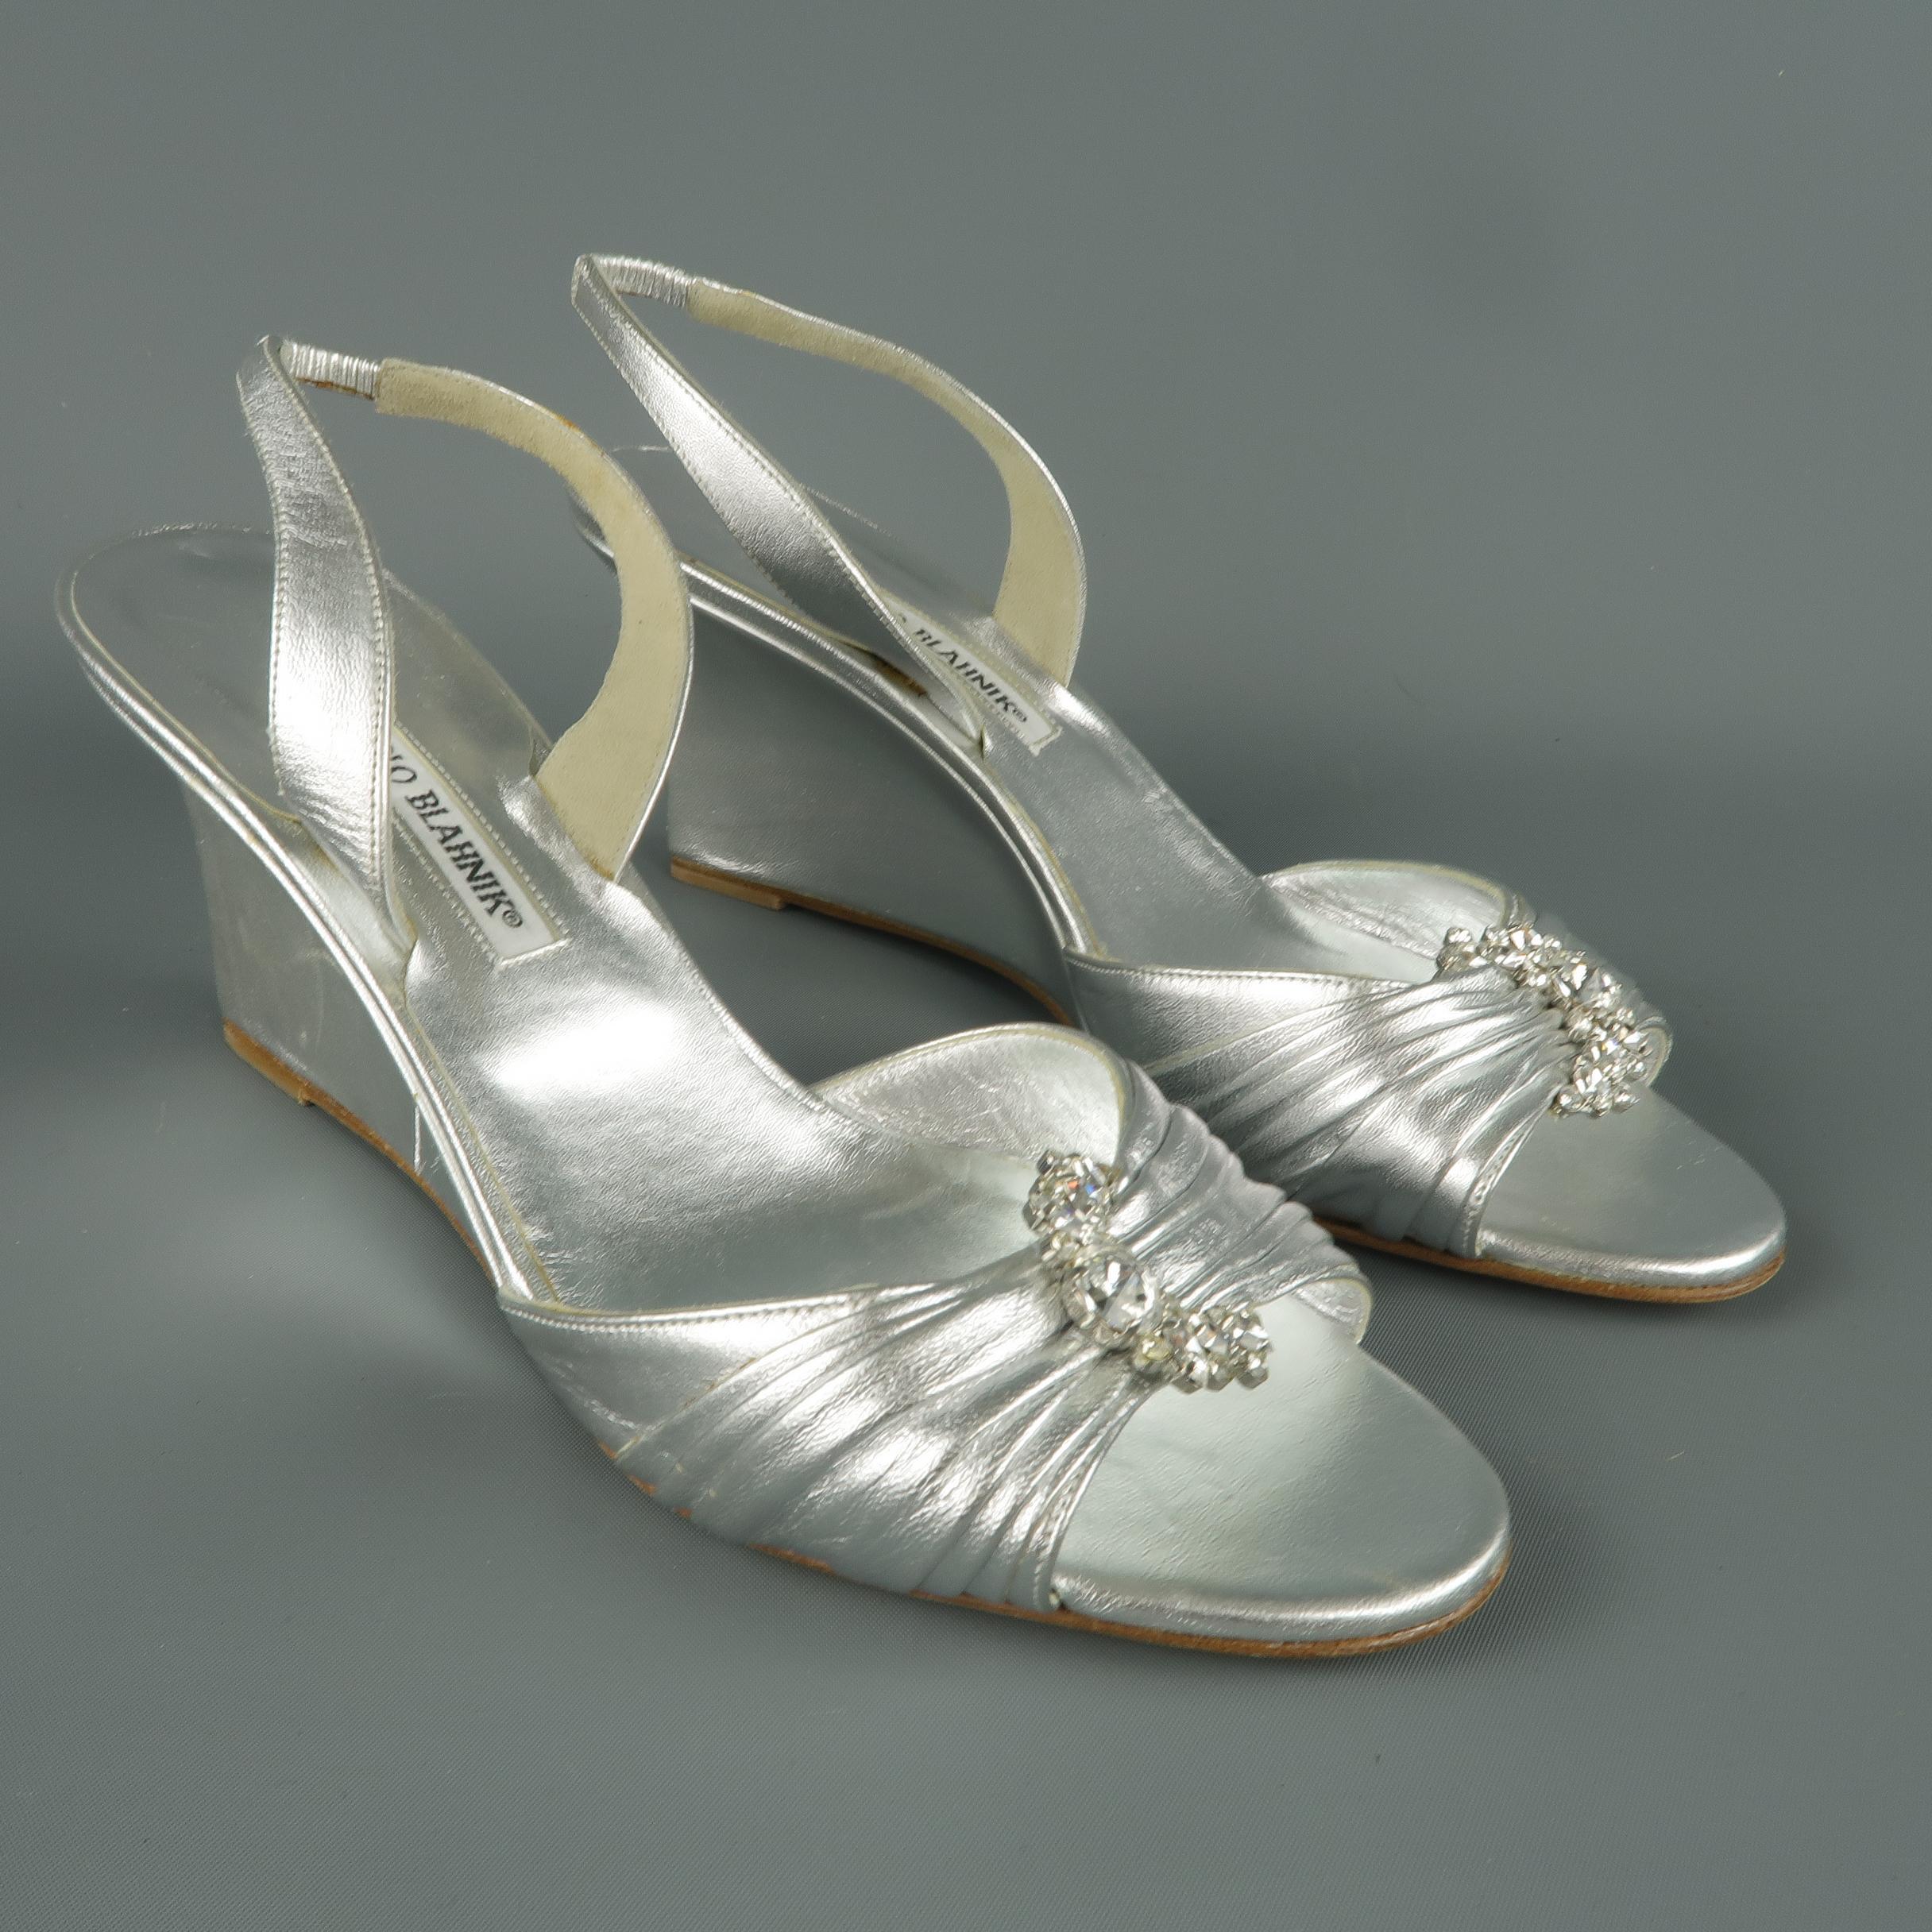 MANOLO BLAHNIK sandals come in metallic silver leather with a gathered toe strap adorned with a rhinestone brooch, slingback, and covered wedge. Handmade in Italy.
 
Good Pre-Owned Condition.
Marked: IT 40.5
 
Measurements:
 
Heel: 3 in.